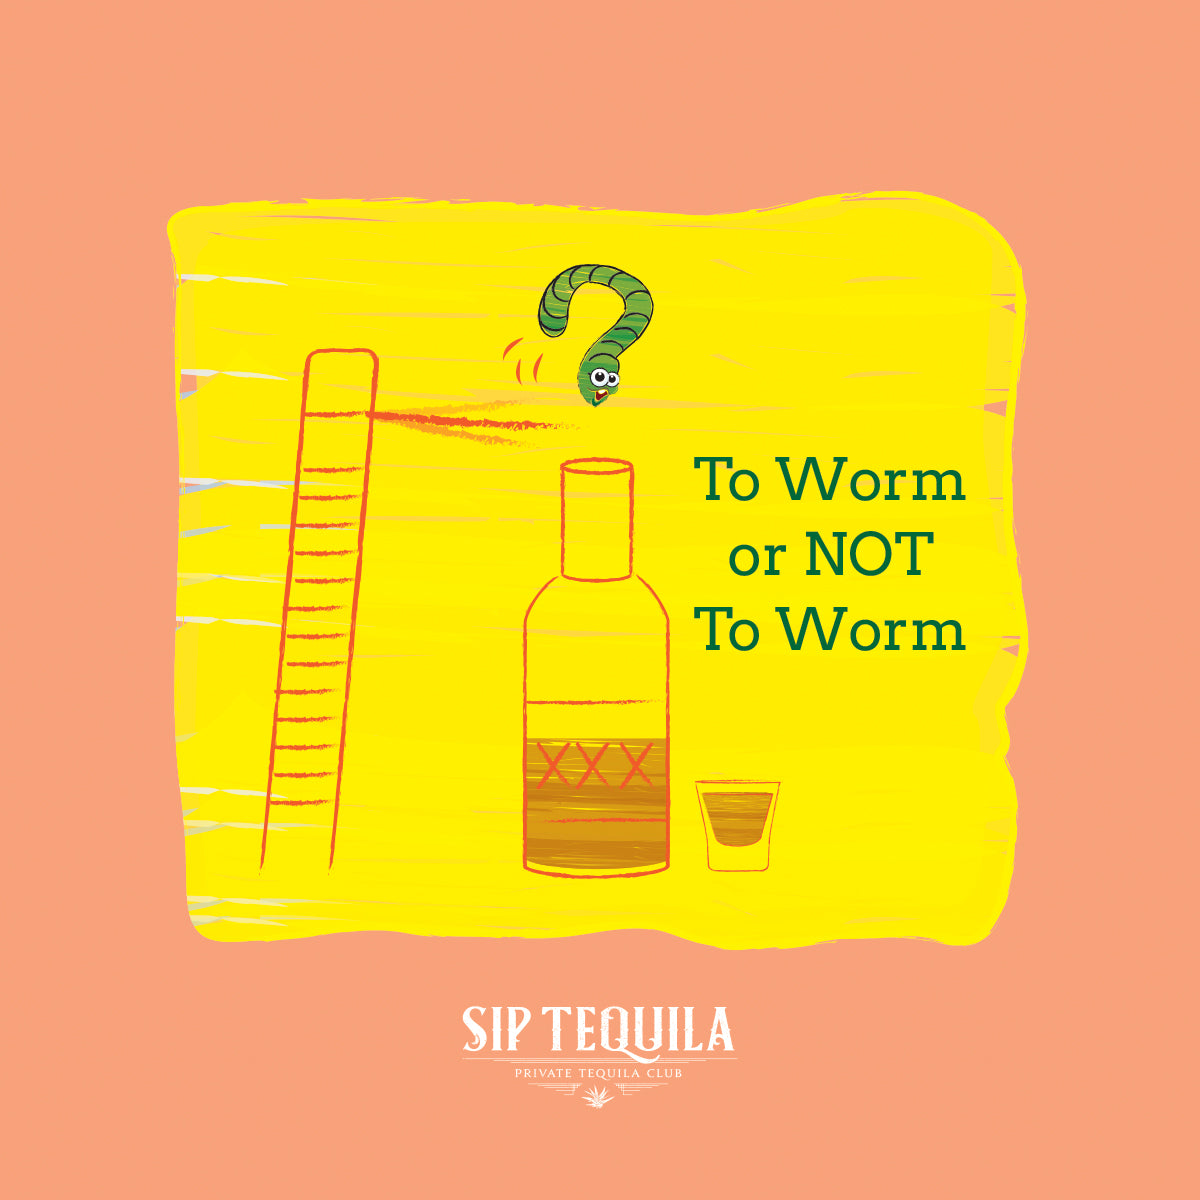 Worm in Tequila